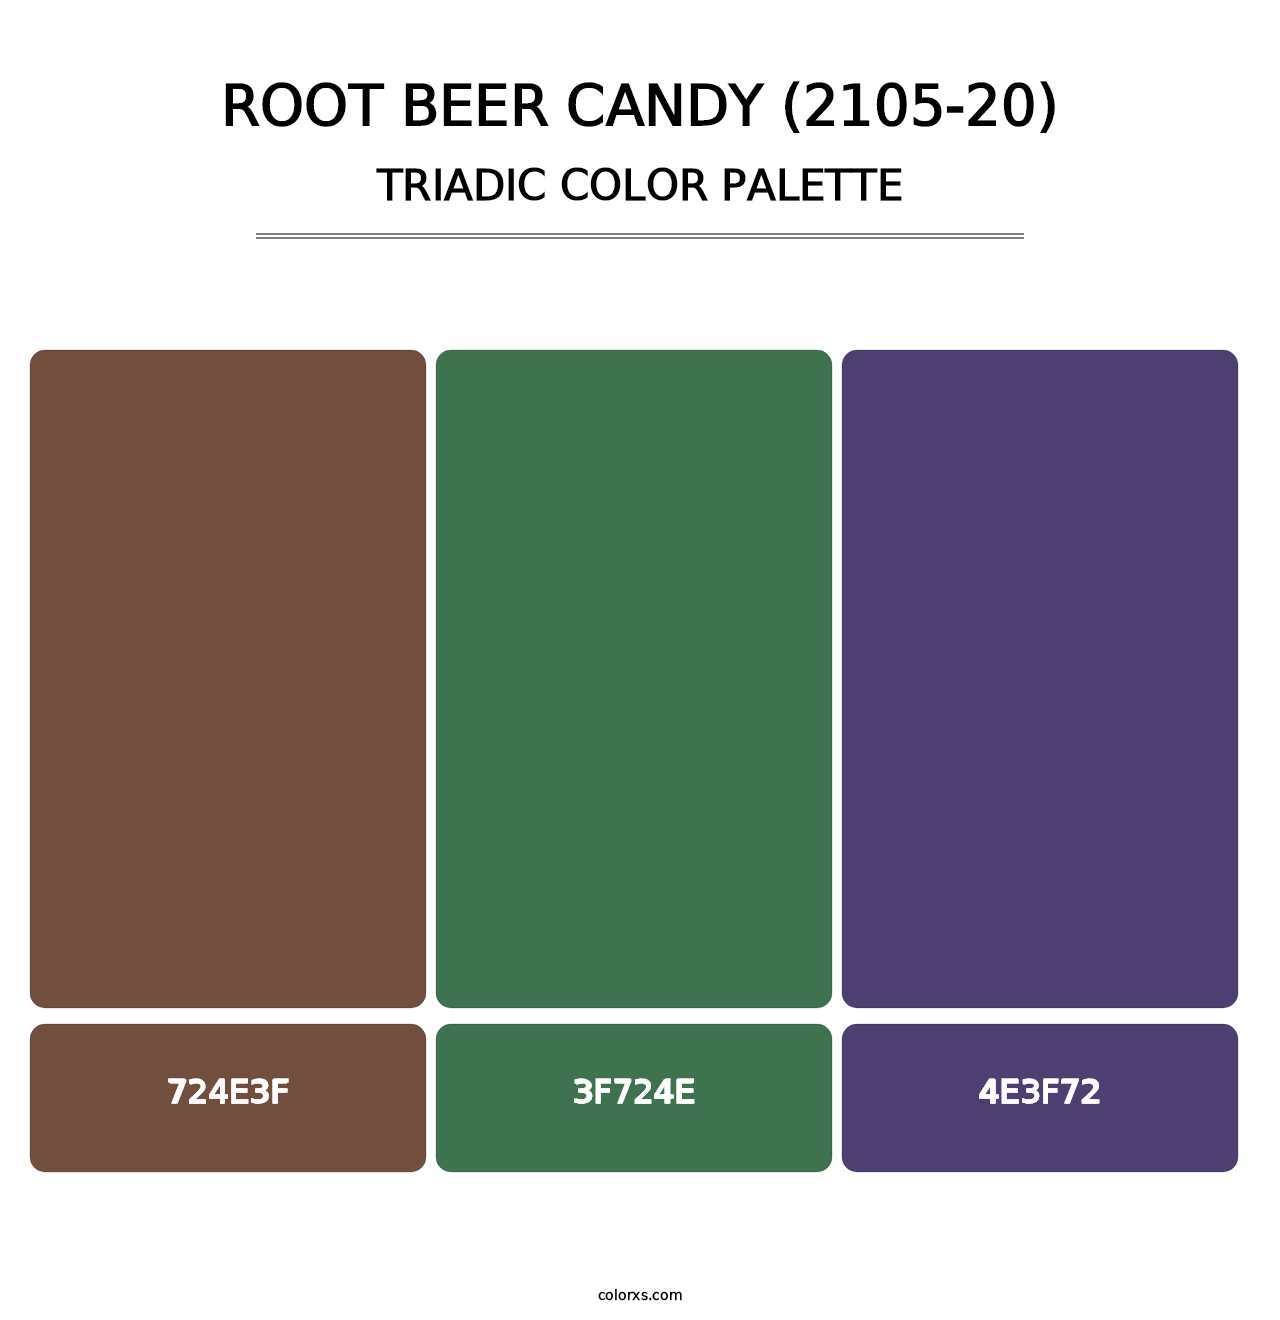 Root Beer Candy (2105-20) - Triadic Color Palette